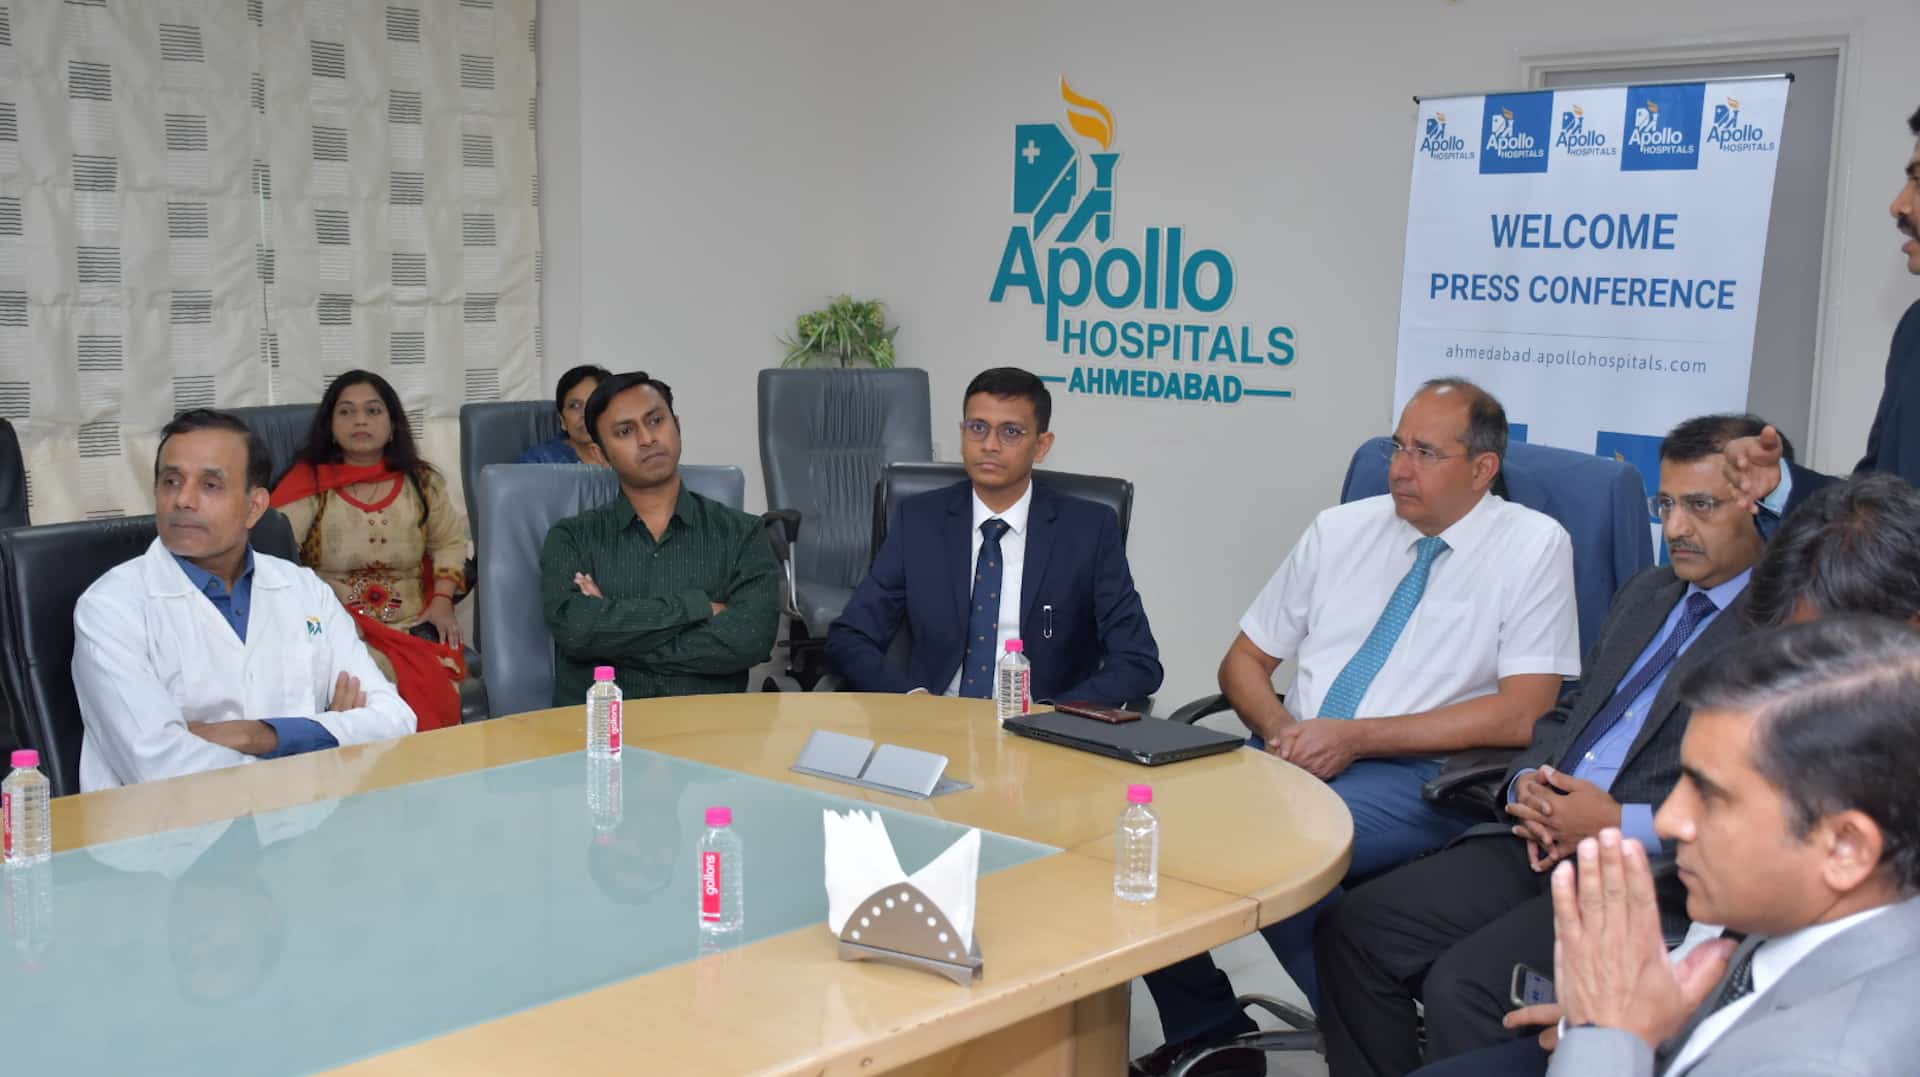 Apollo Hospitals, Ahmedabad, on Monday launched a comprehensive liver care programme with special emphasis on both adult and children's liver care